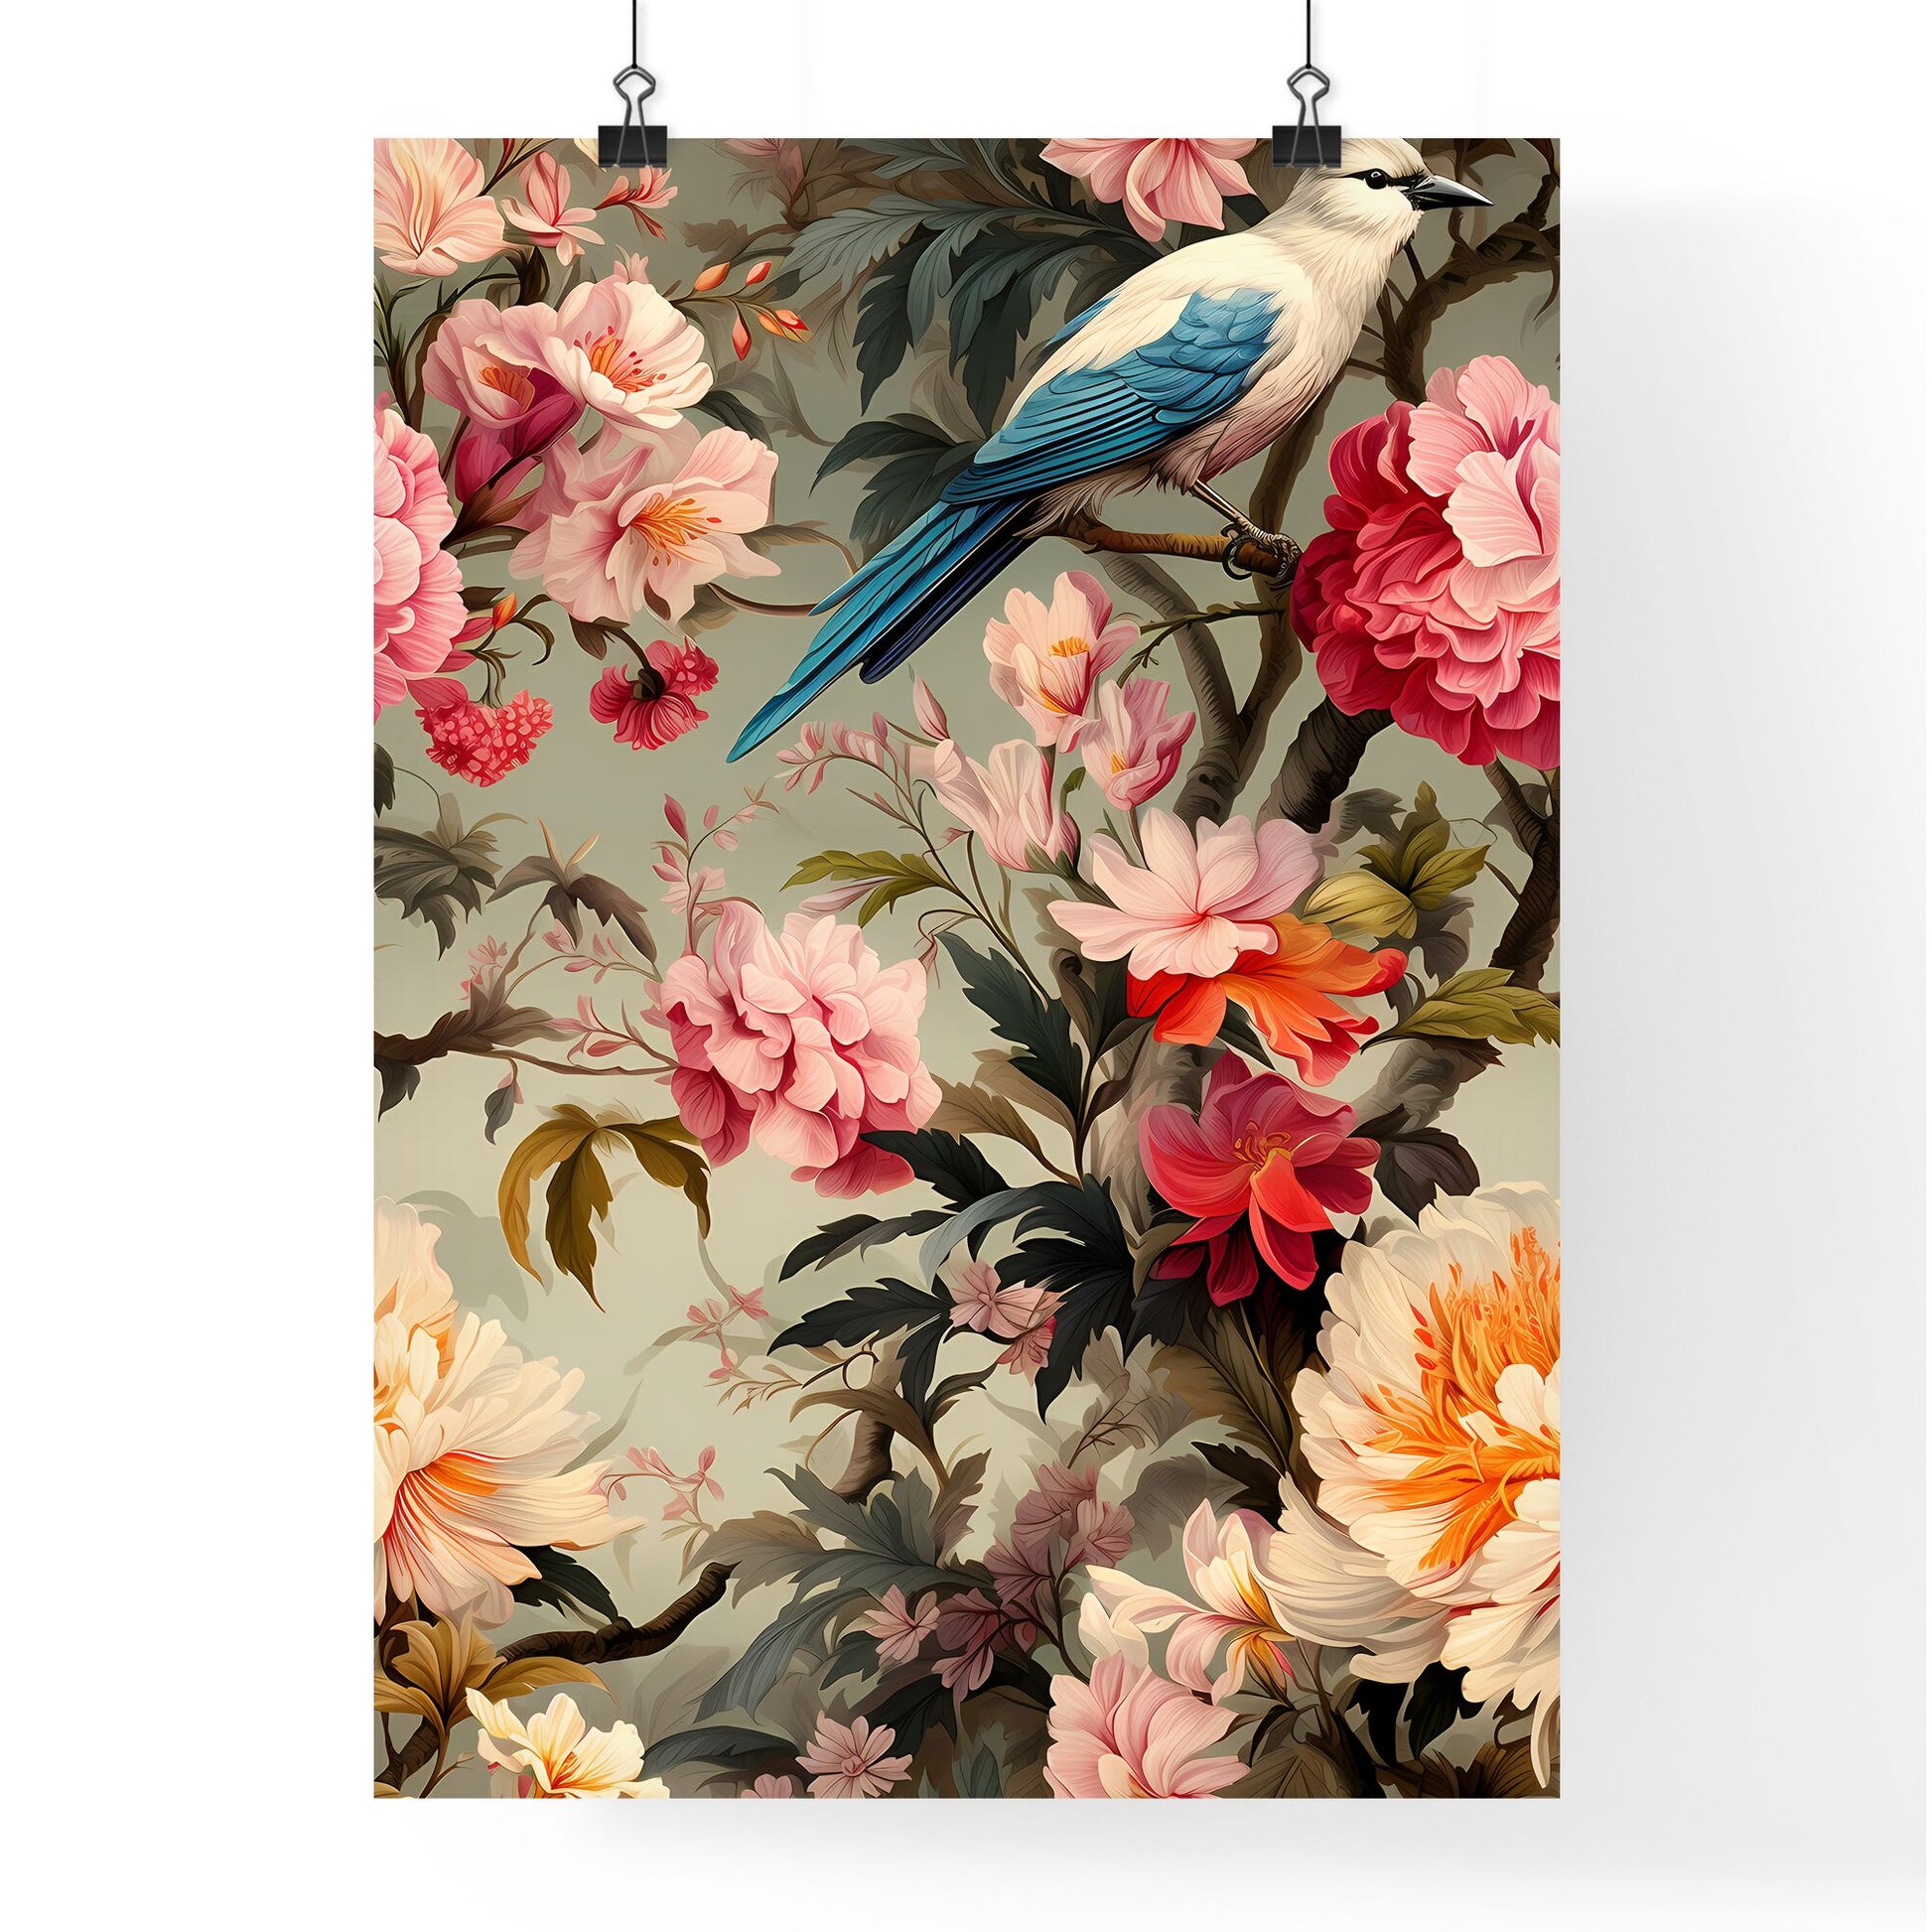 Foliate Pattern With Birds - A Bird On A Branch With Flowers Default Title